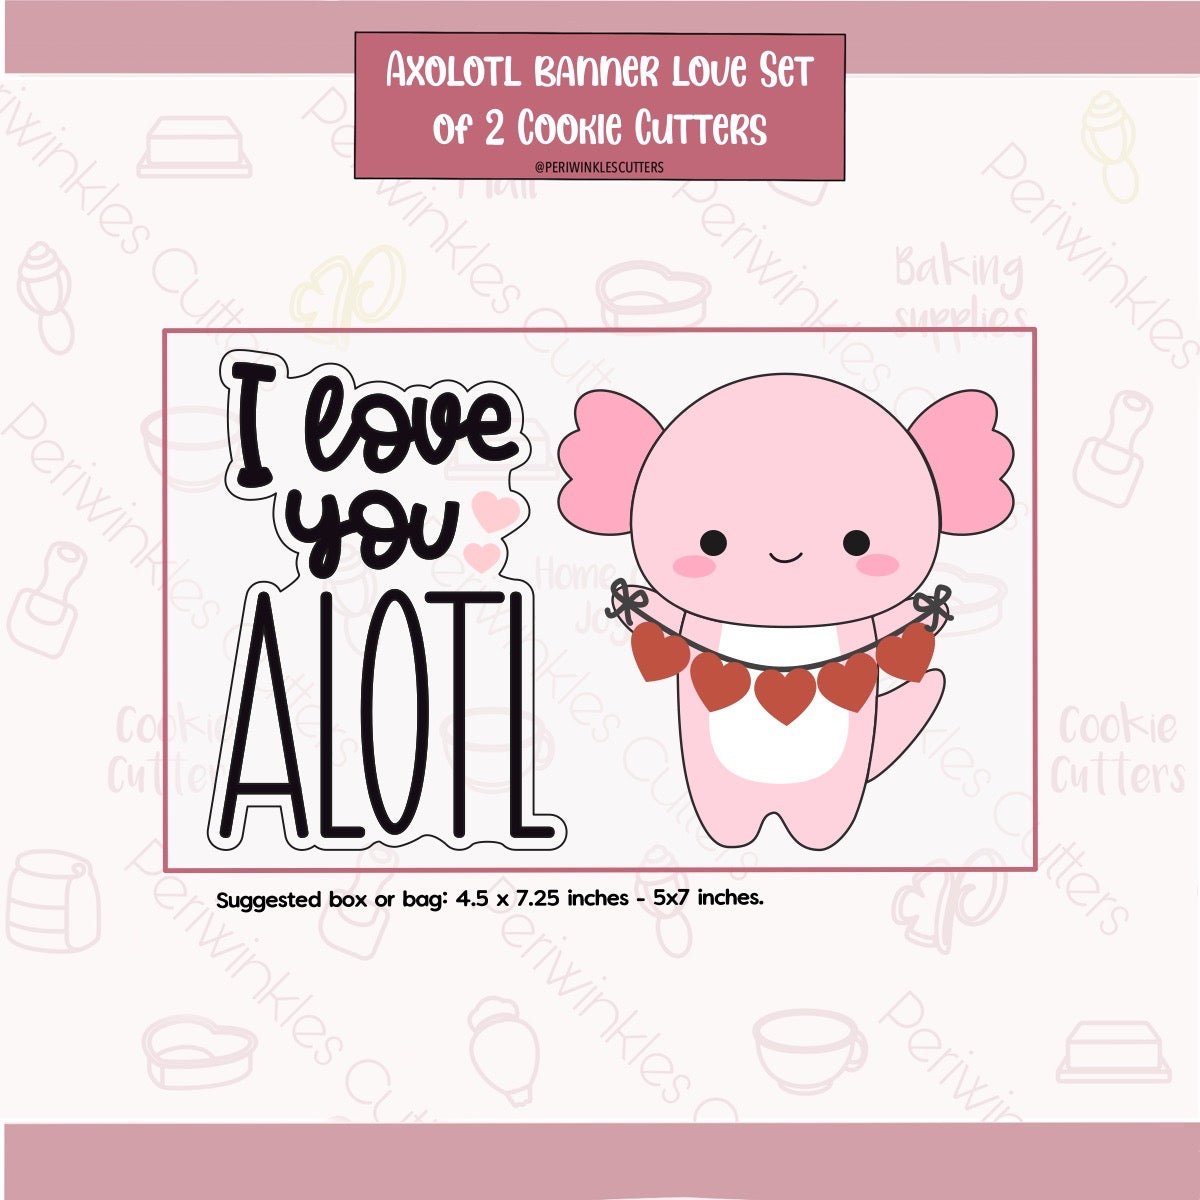 Banner I Love you Alotl Set of 2 Cookie Cutter - Periwinkles Cutters Cookie Cutter